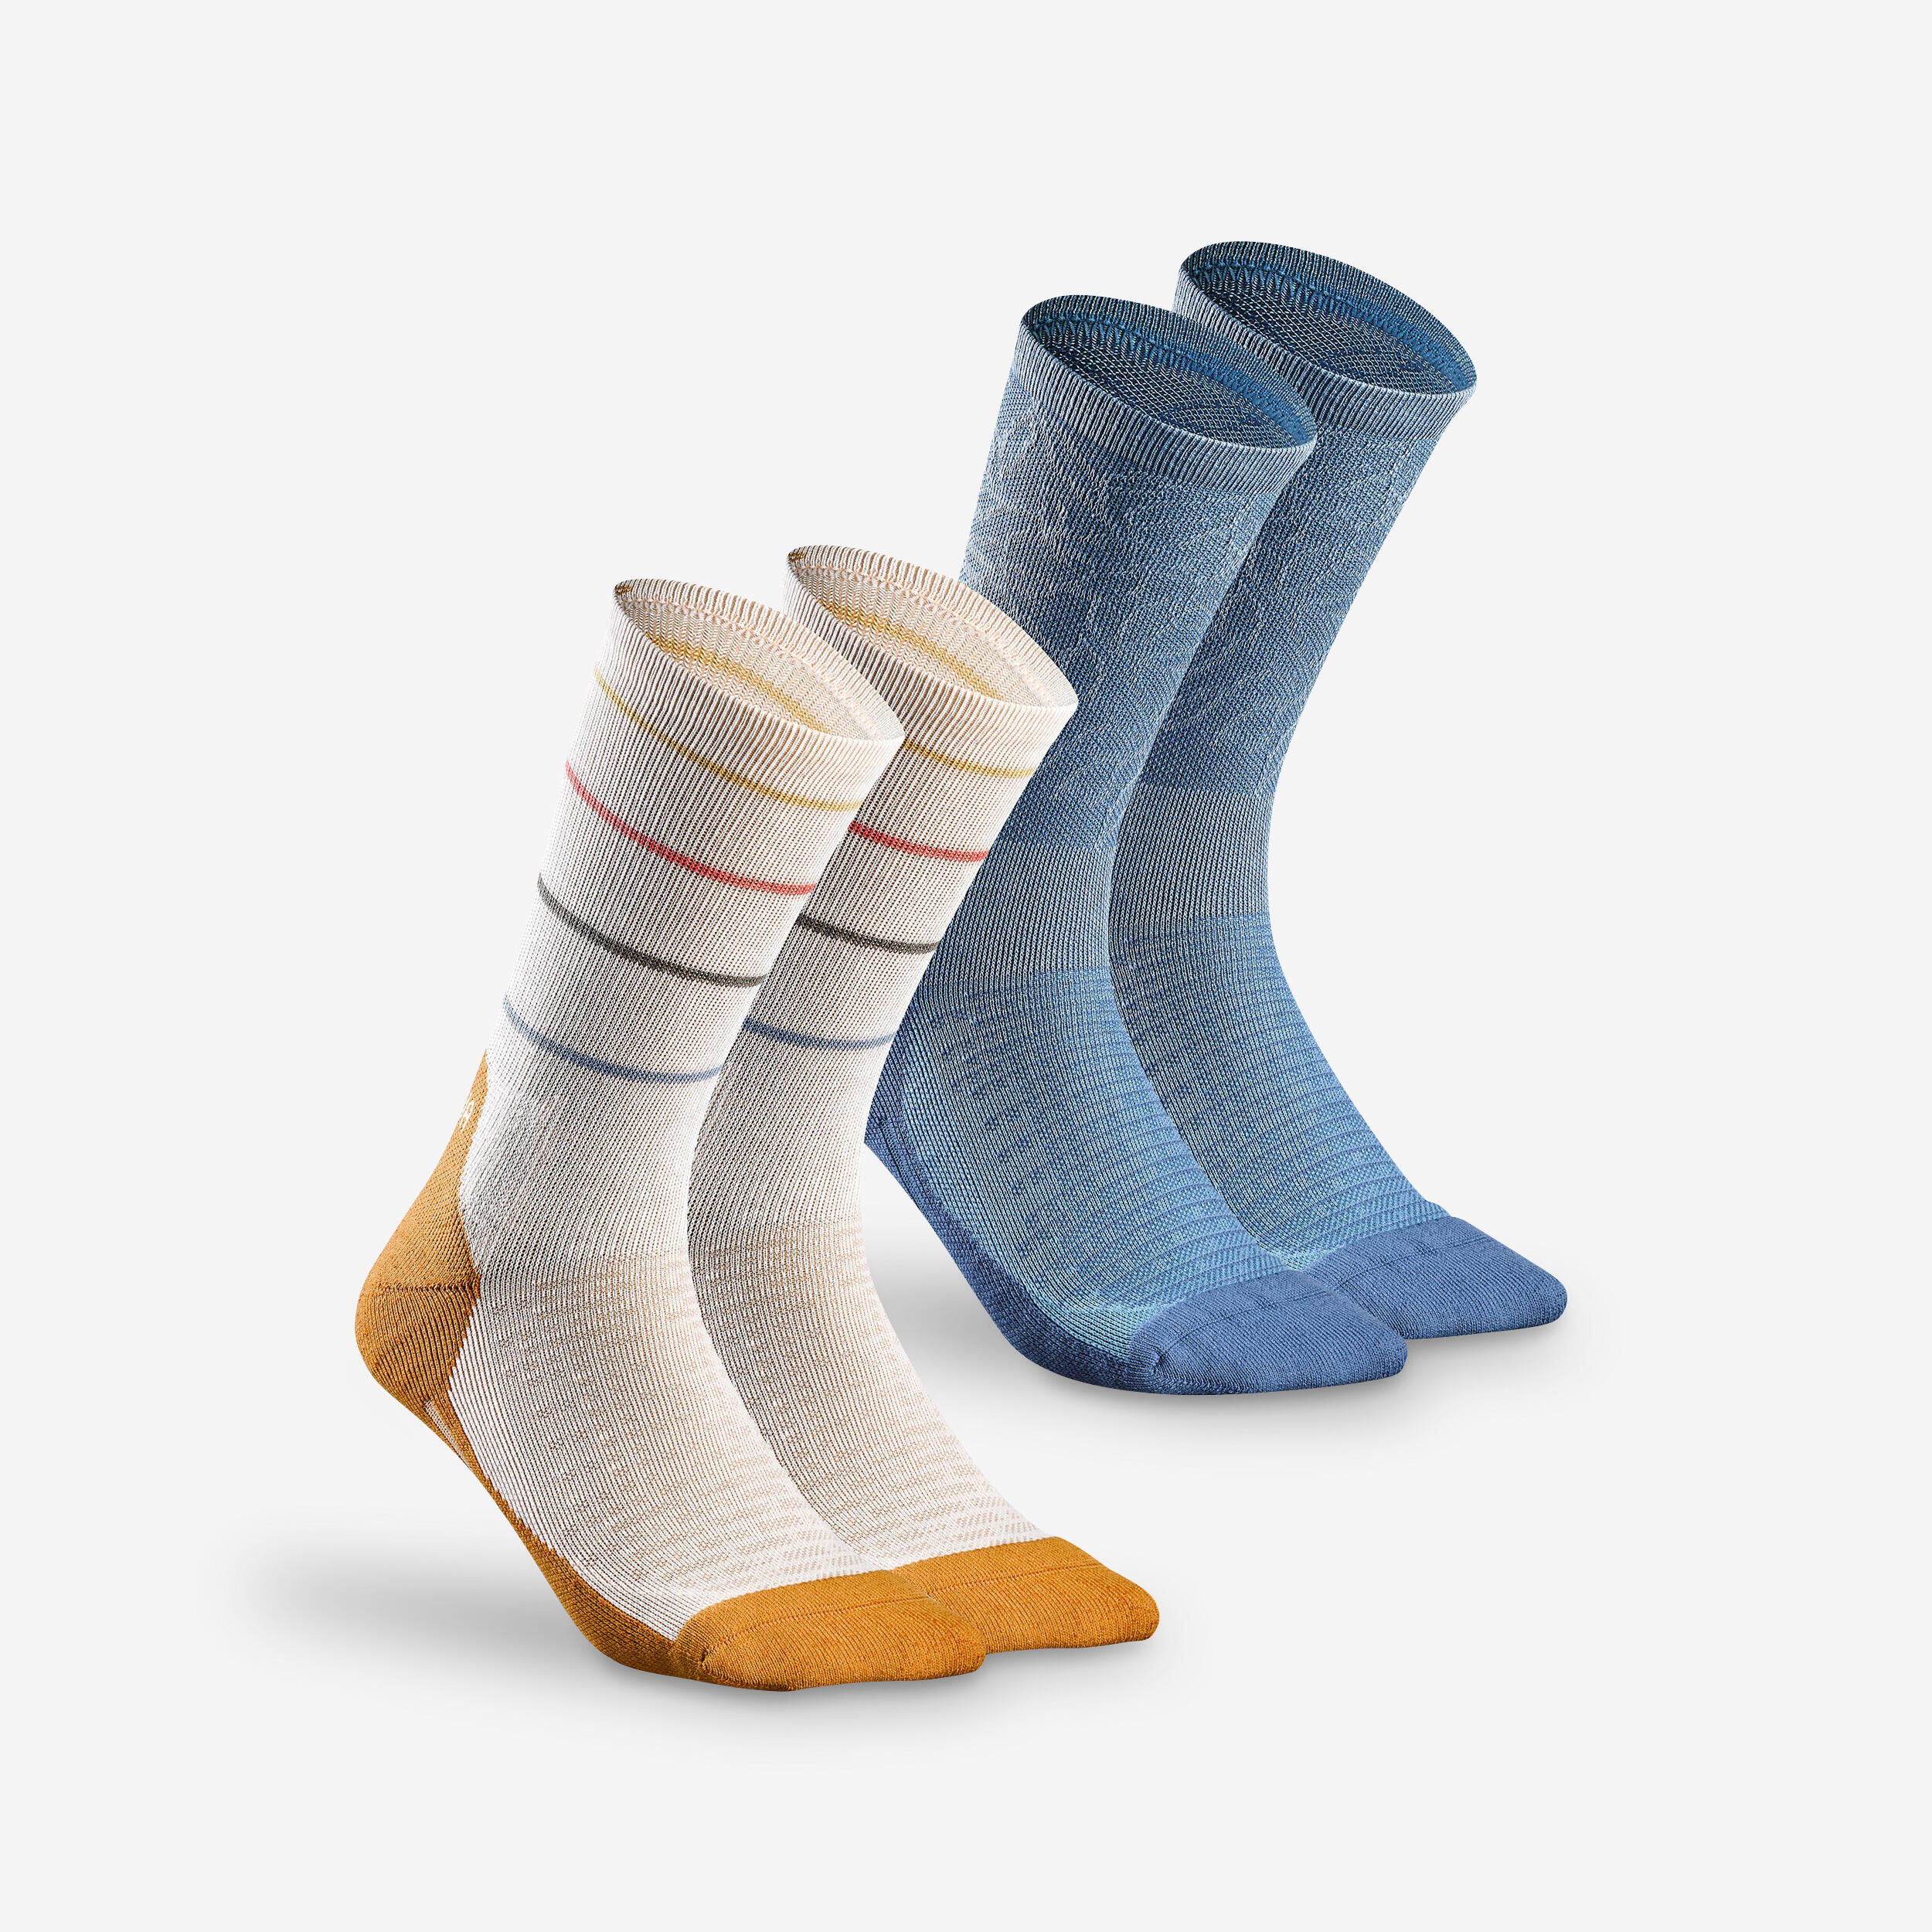 QUECHUA Hike 100 High Socks  - Trendy stripes and blue - Pack of 2 pairs